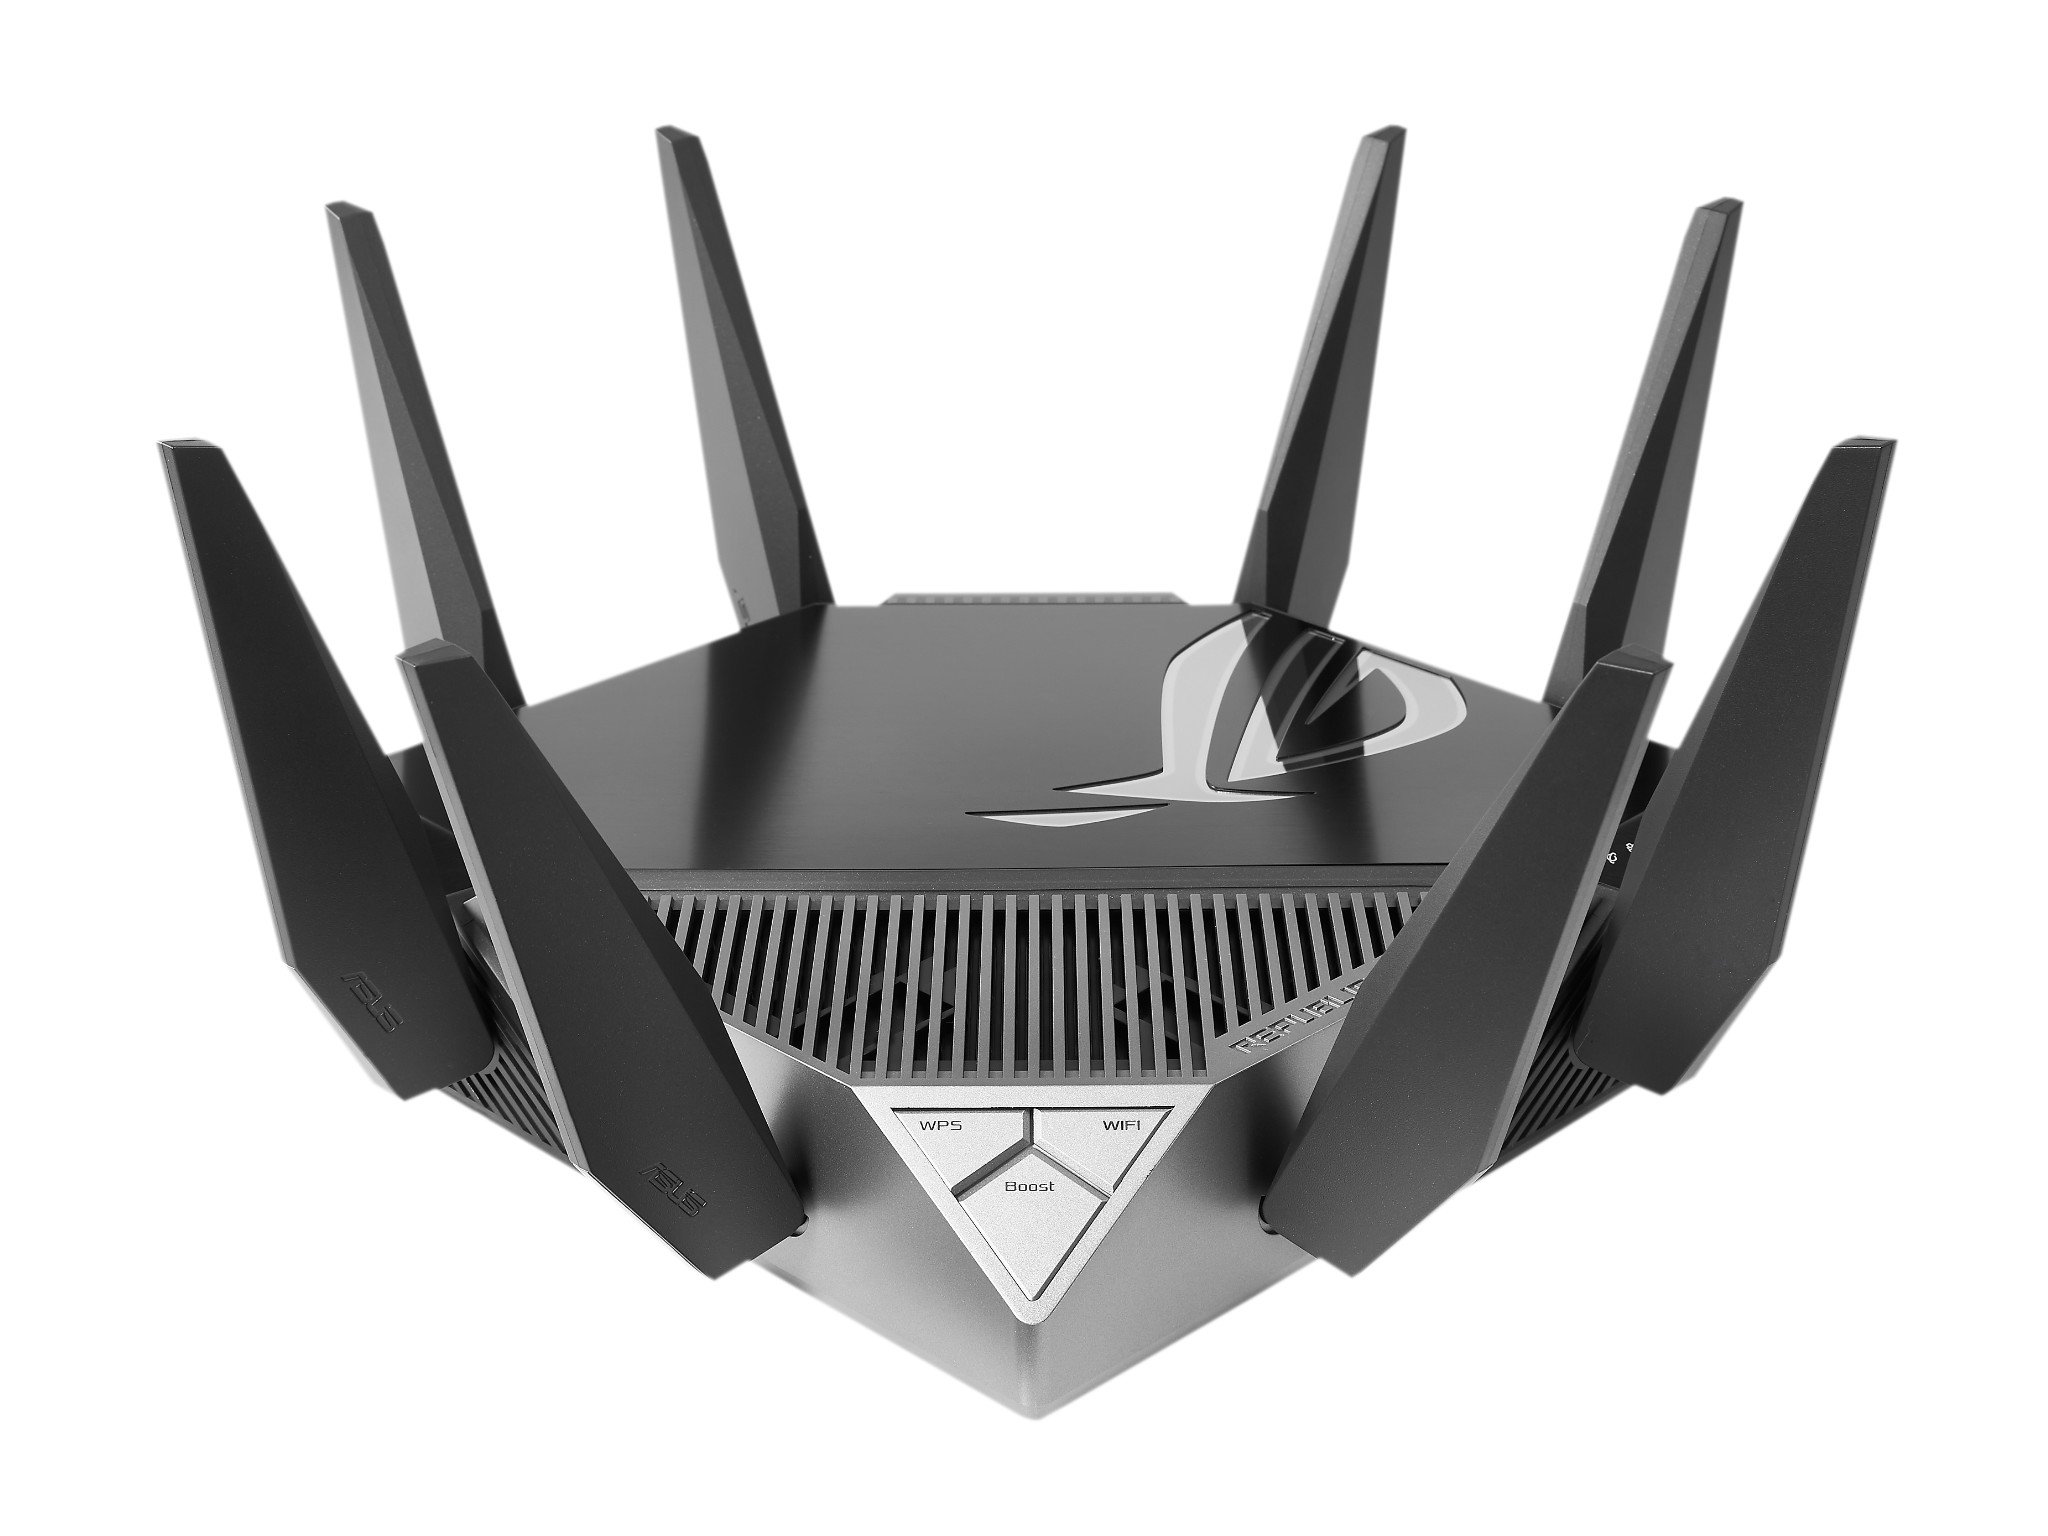 What does a 550 ASUS ROG router get you Wi Fi 6E support and 